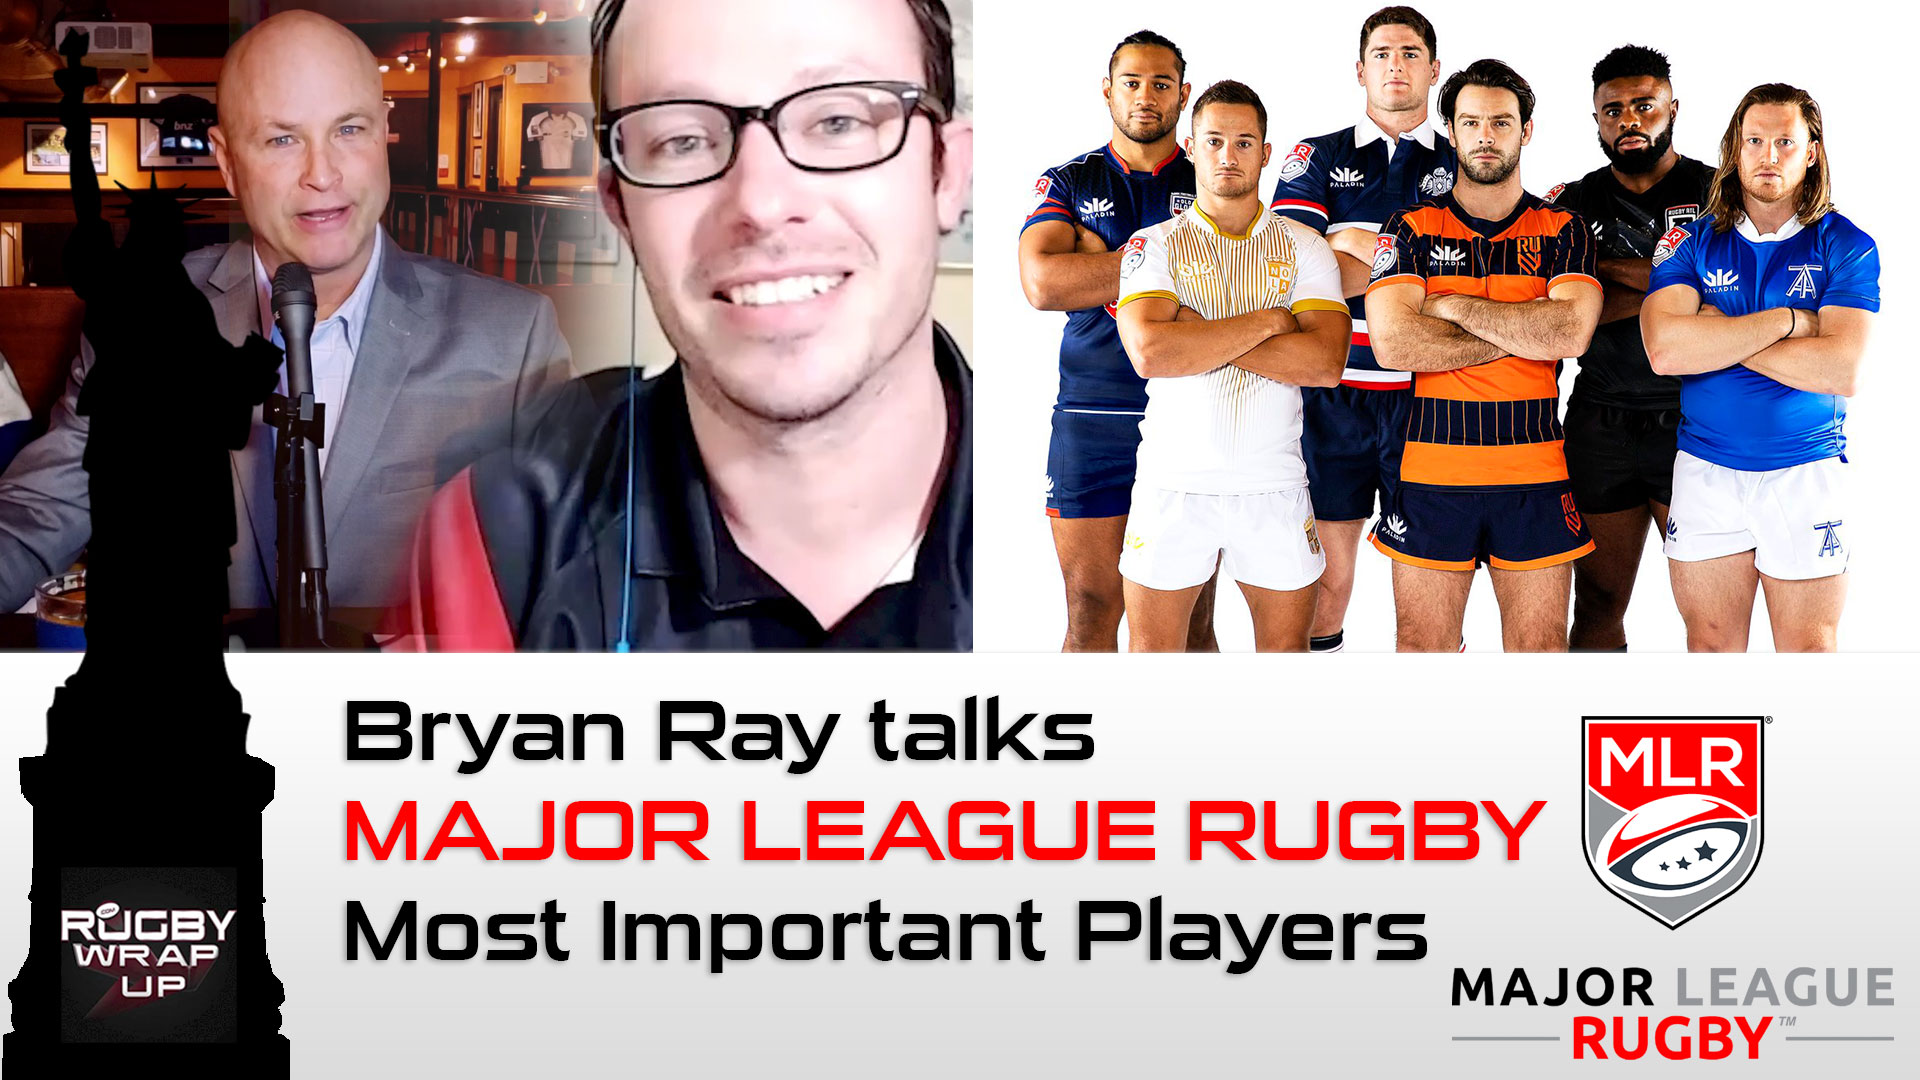 Major League Rugby: Most Important Players (Eastern Conference) wit Bryan Ray, Predictions, Analysis